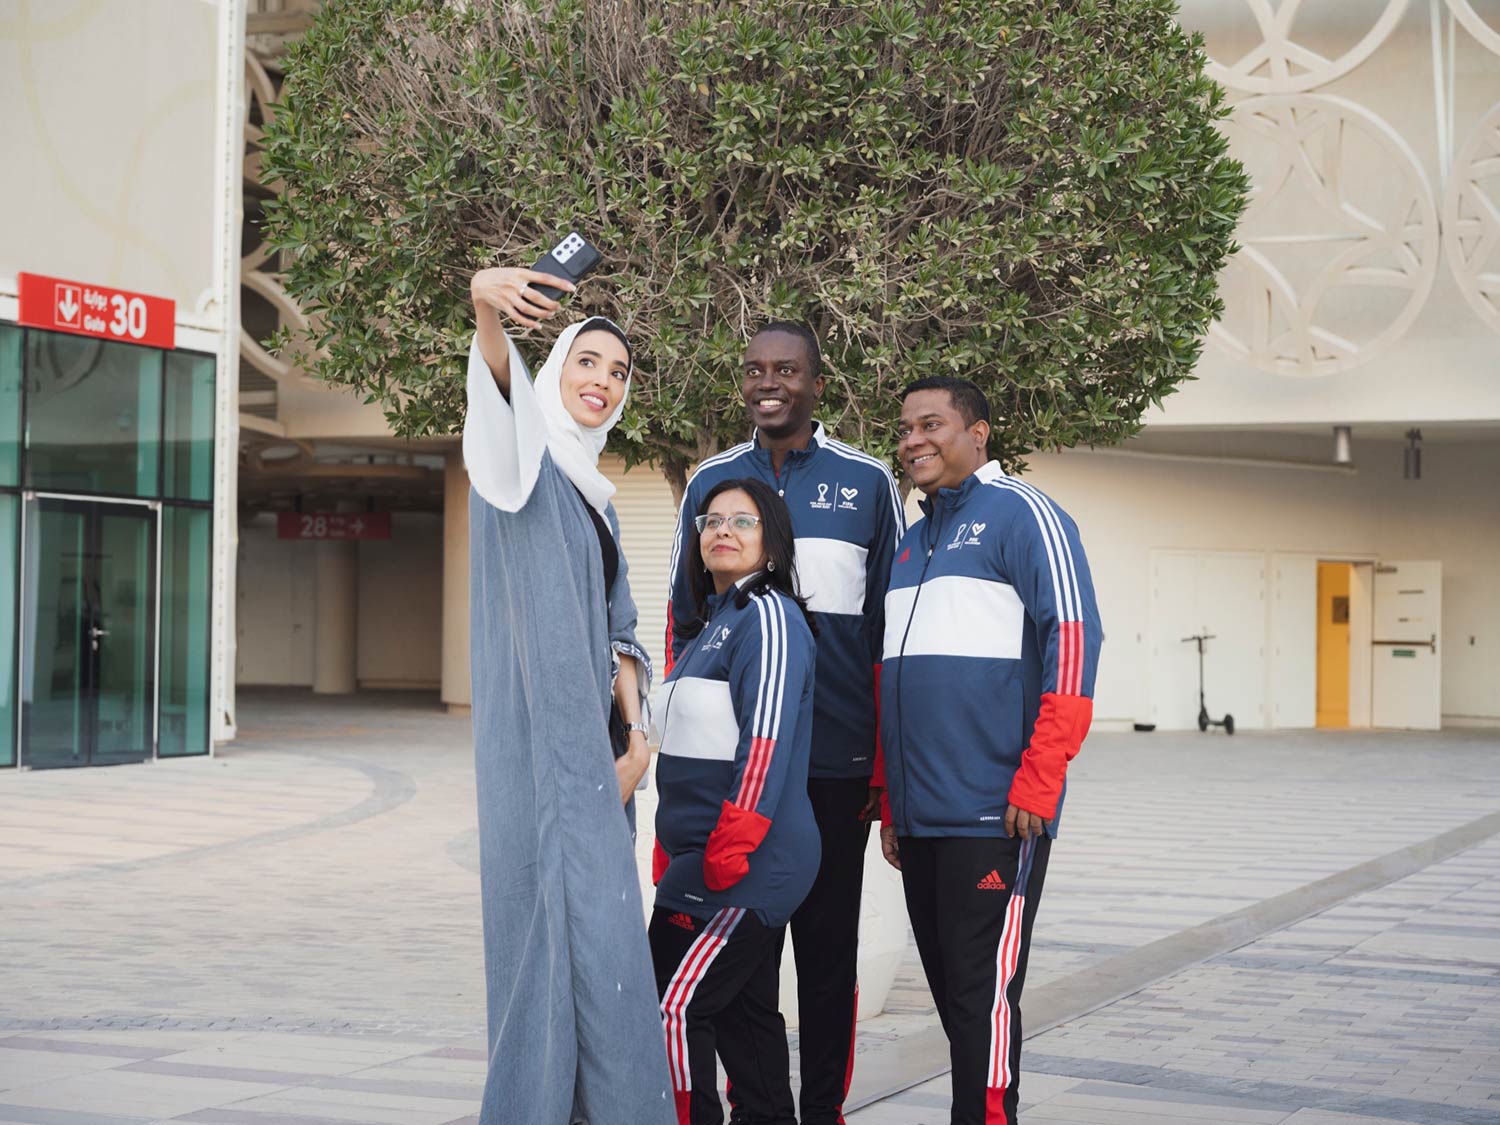 Experience Qatar’s FIFA World Cup™ as a valued volunteer